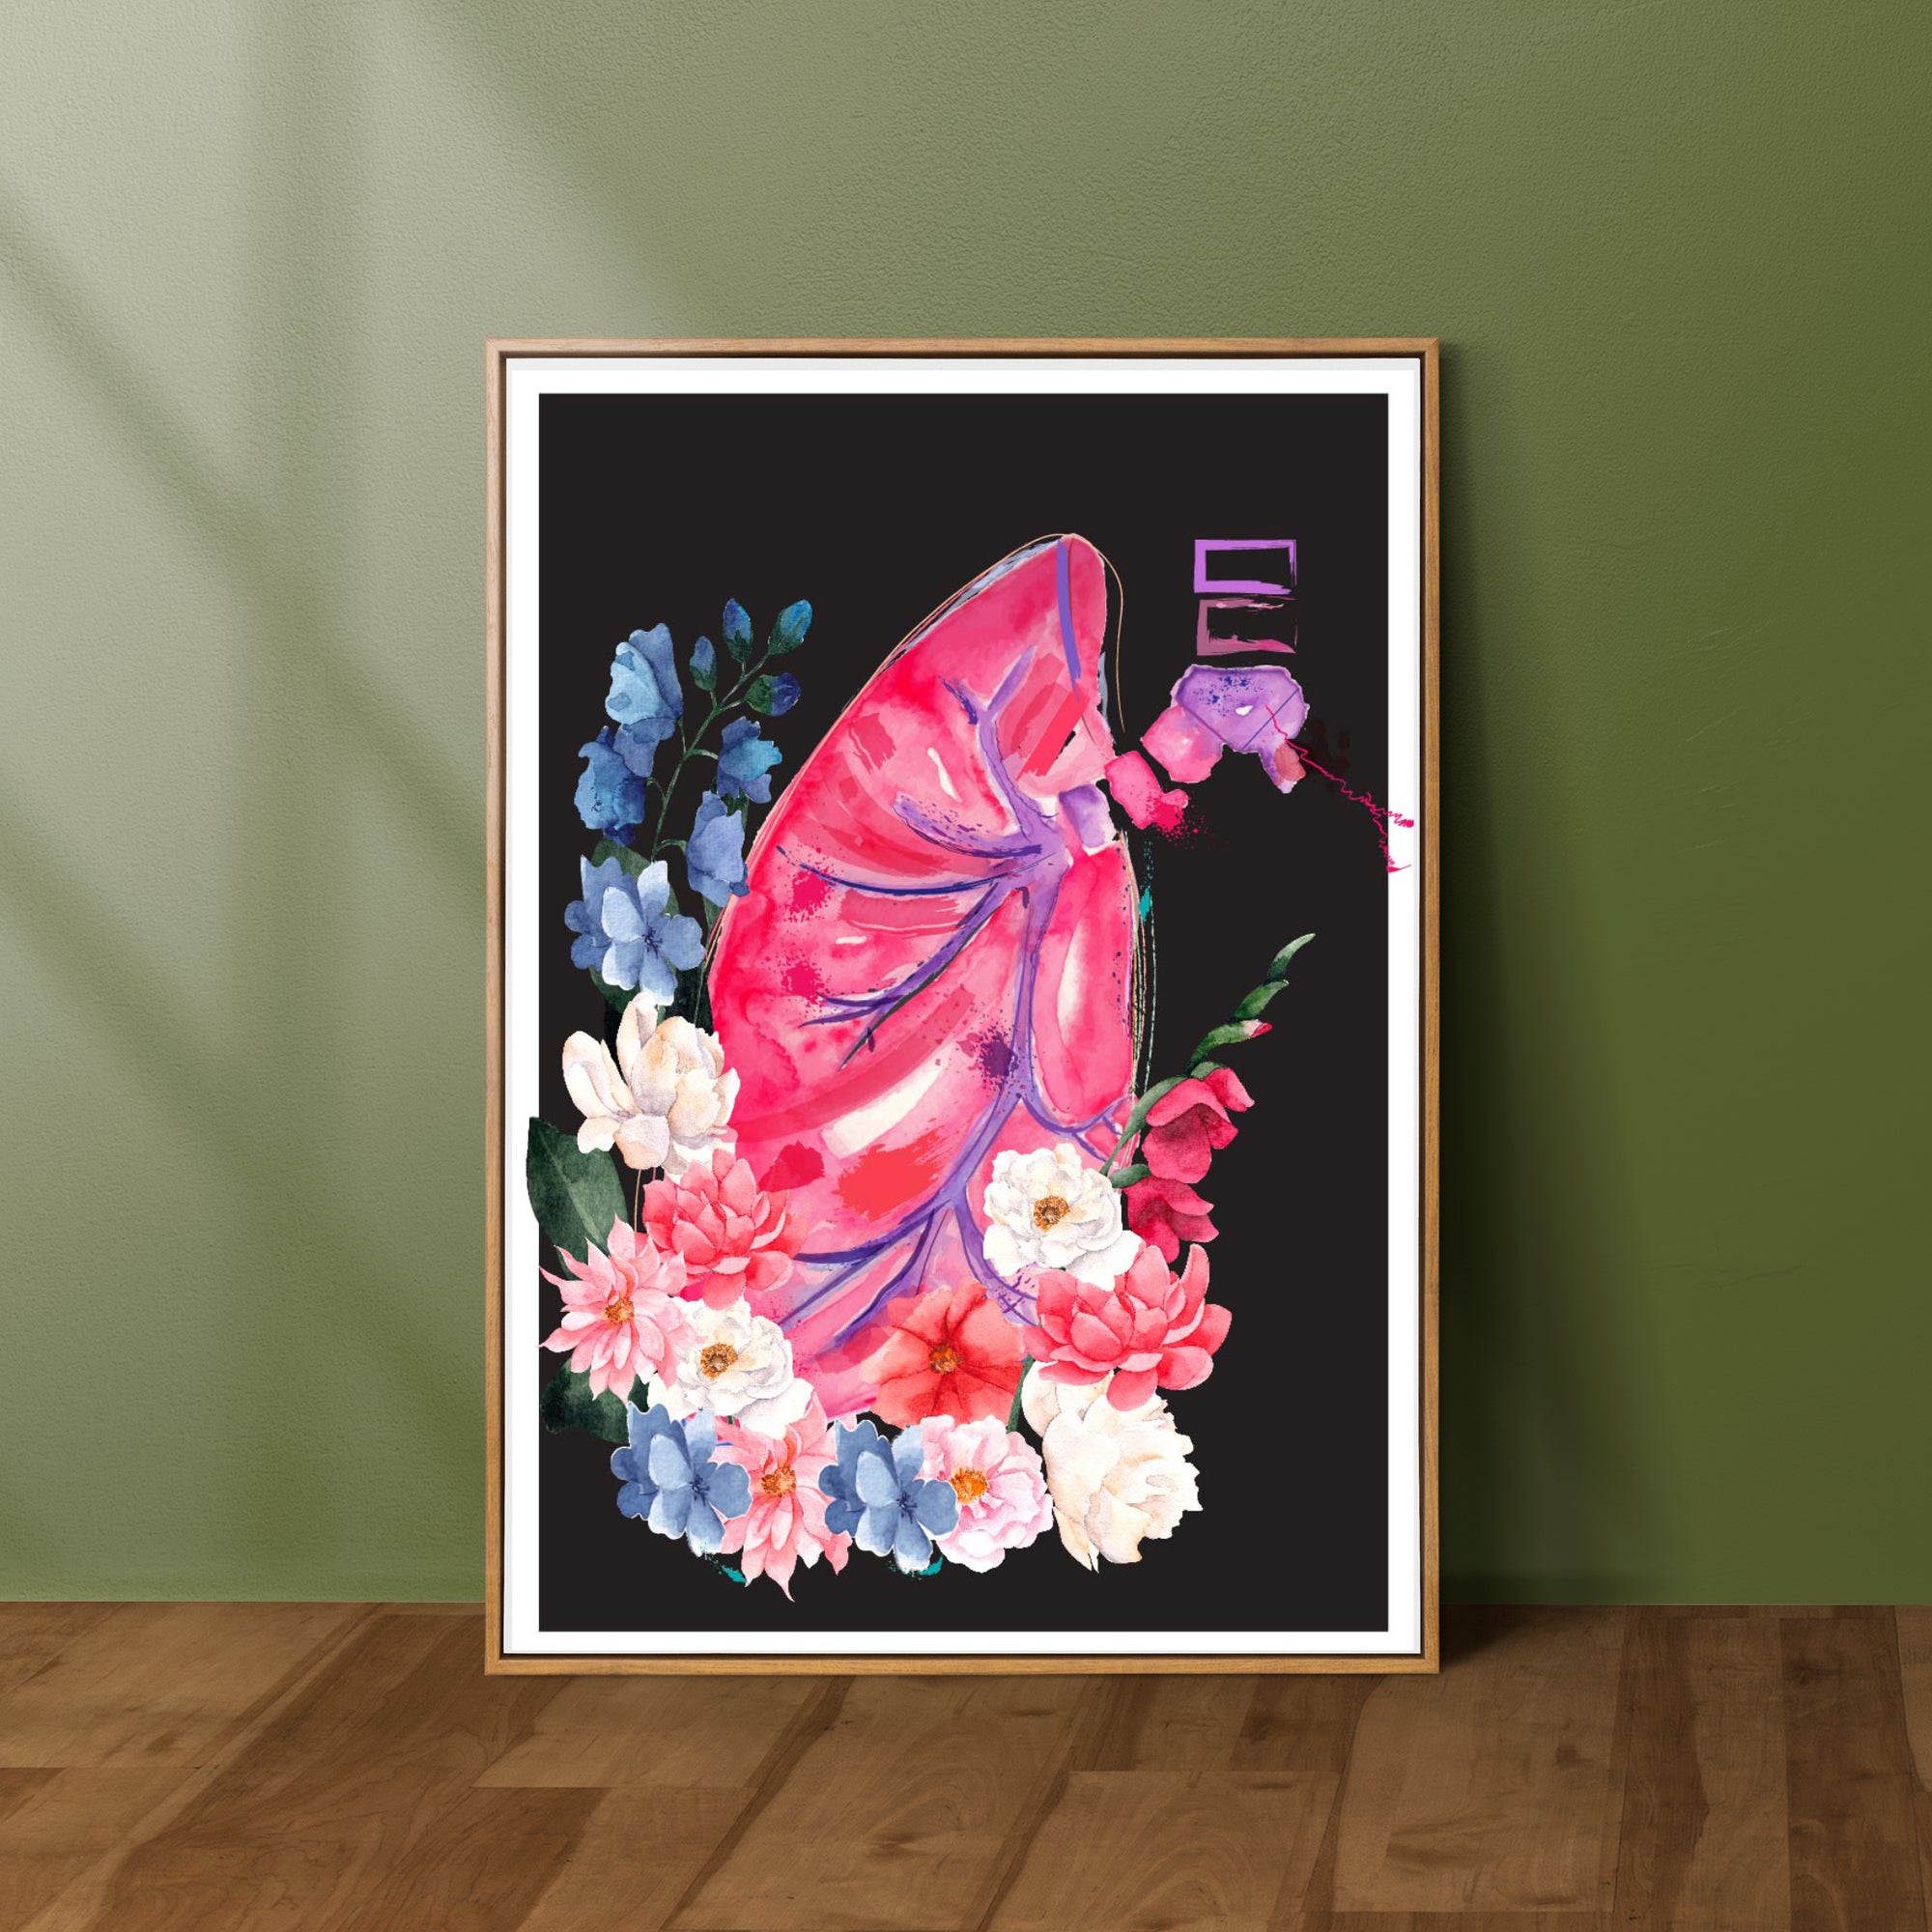 lung anatomy art with flowers